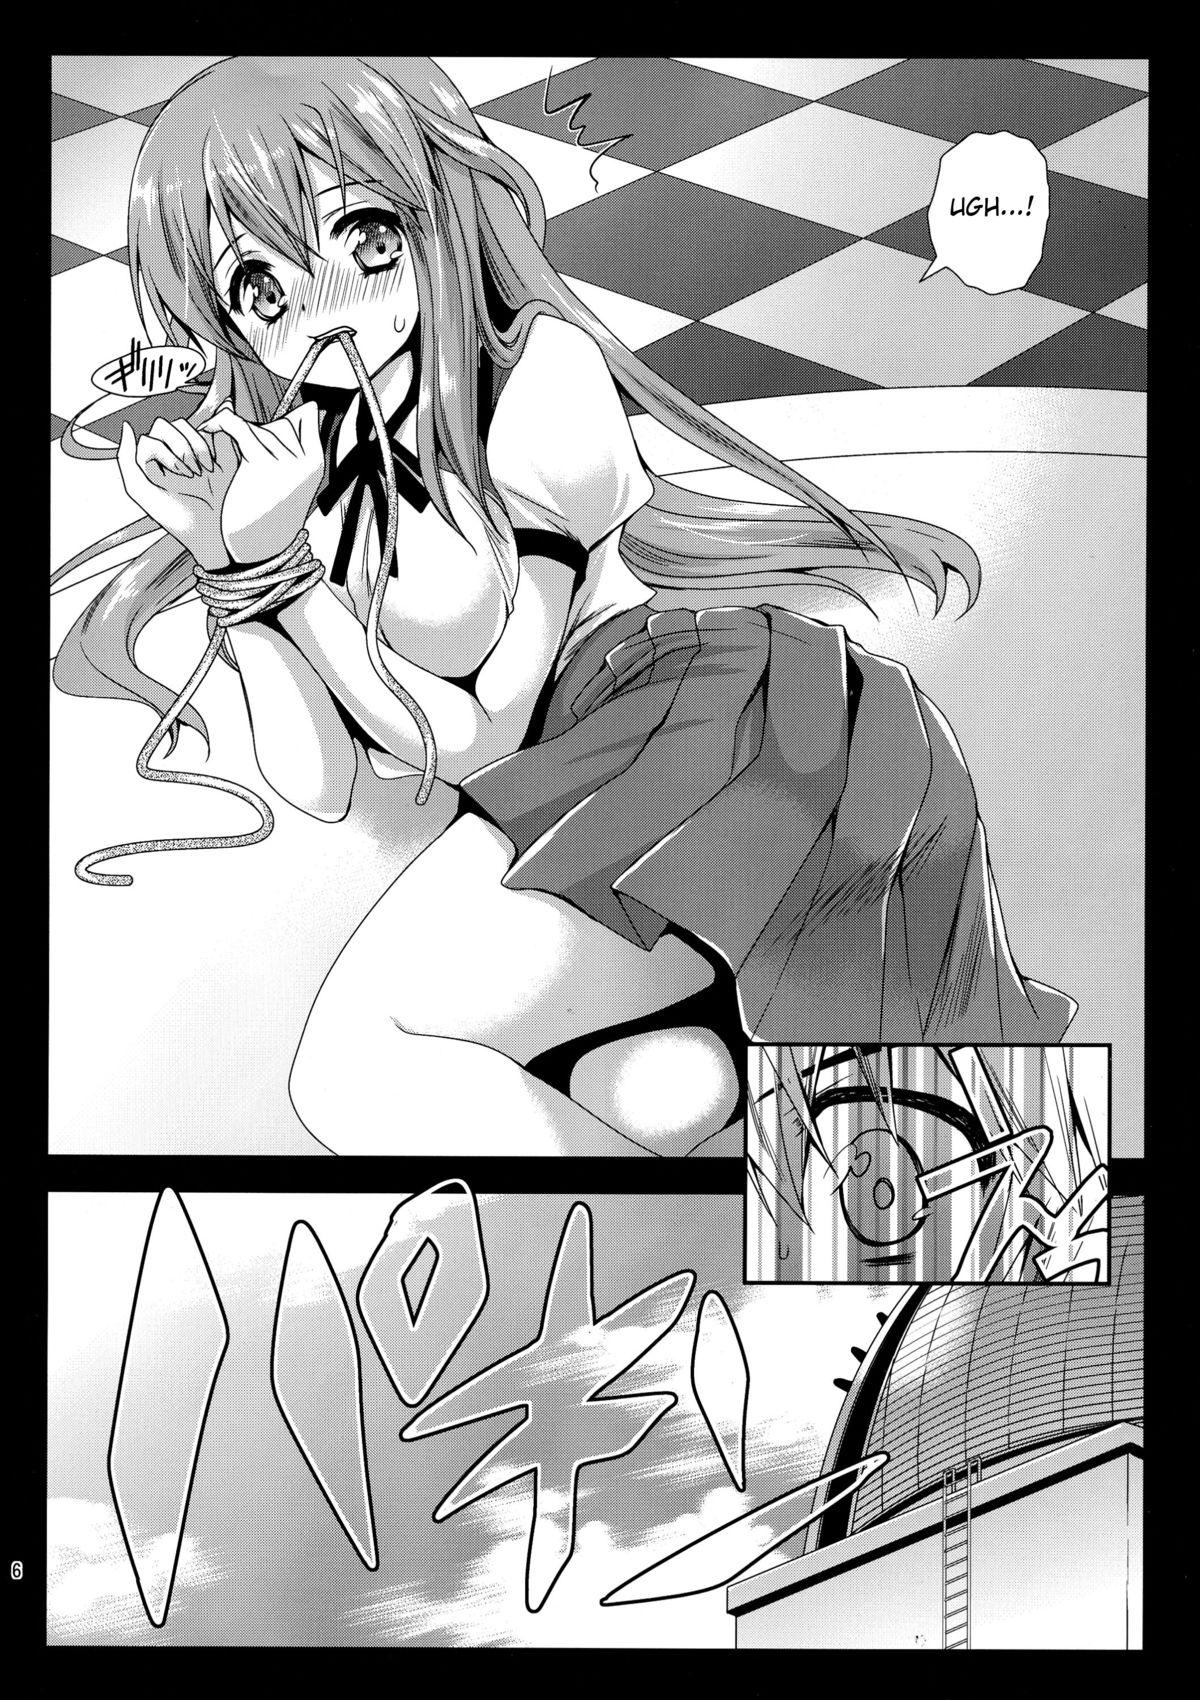 Buttfucking Kotori Hang Up! - Brynhildr in the darkness Cheating Wife - Page 6